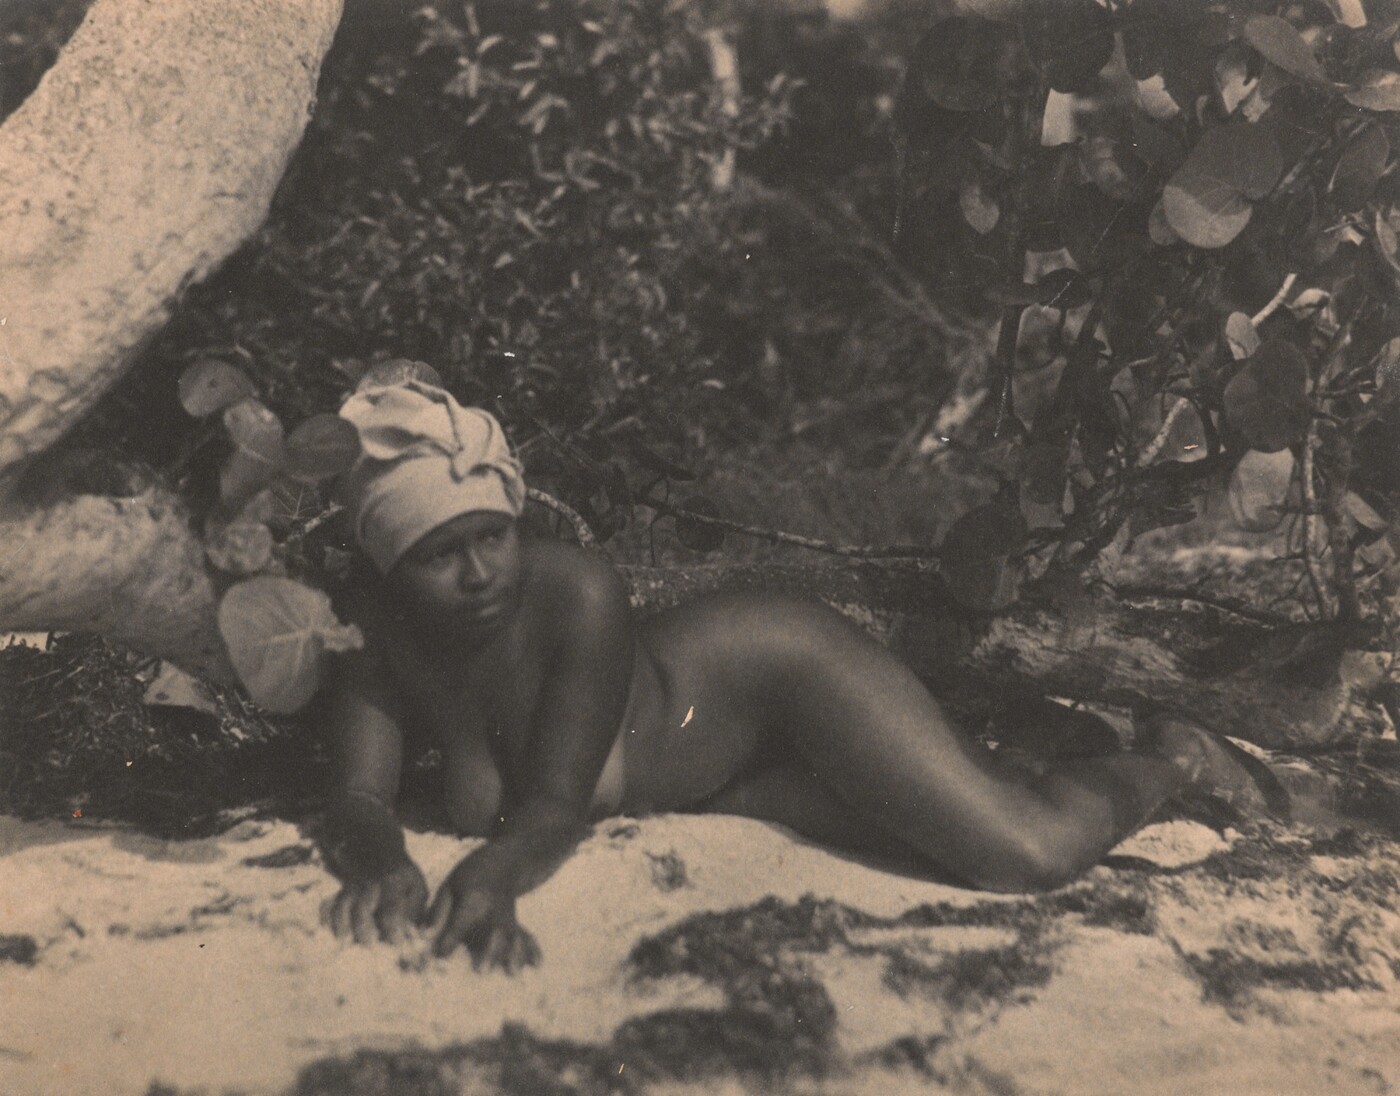 Nell Dorr (1893-1988); [Nude in turban reclining on side]; 1929-1934; Gelatin silver print; Amon Carter Museum of American Art; Fort Worth, Texas; Bequest of Nell Dorr; P1990.45.299  